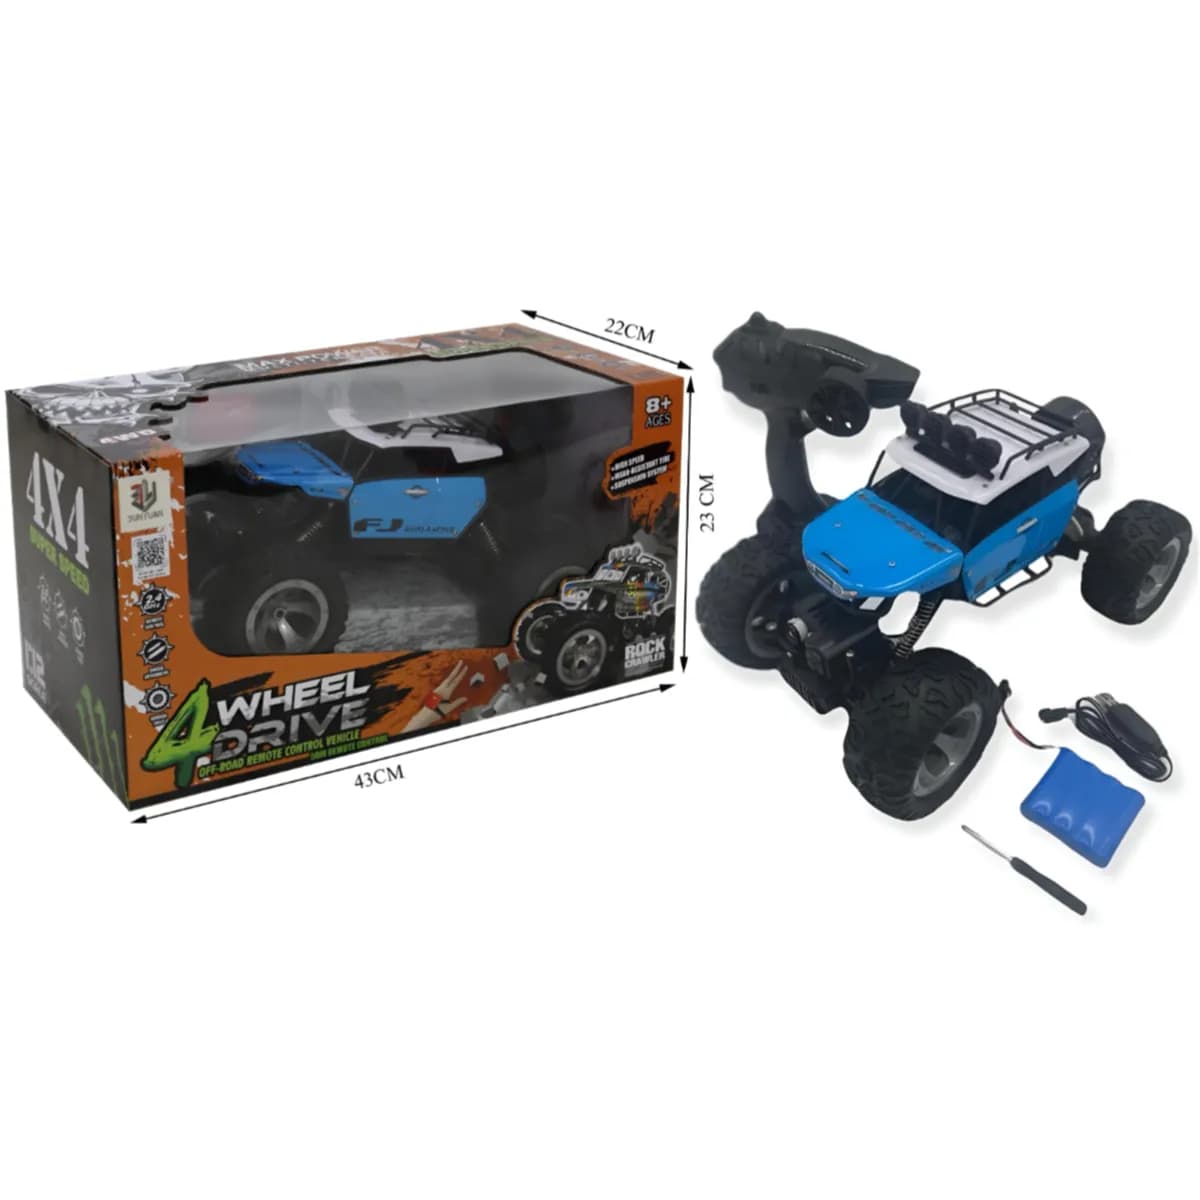 Off-Road 4 Wheel Drive Remote Control Vehicle Rc Car -Blue Color (Ofgb15)